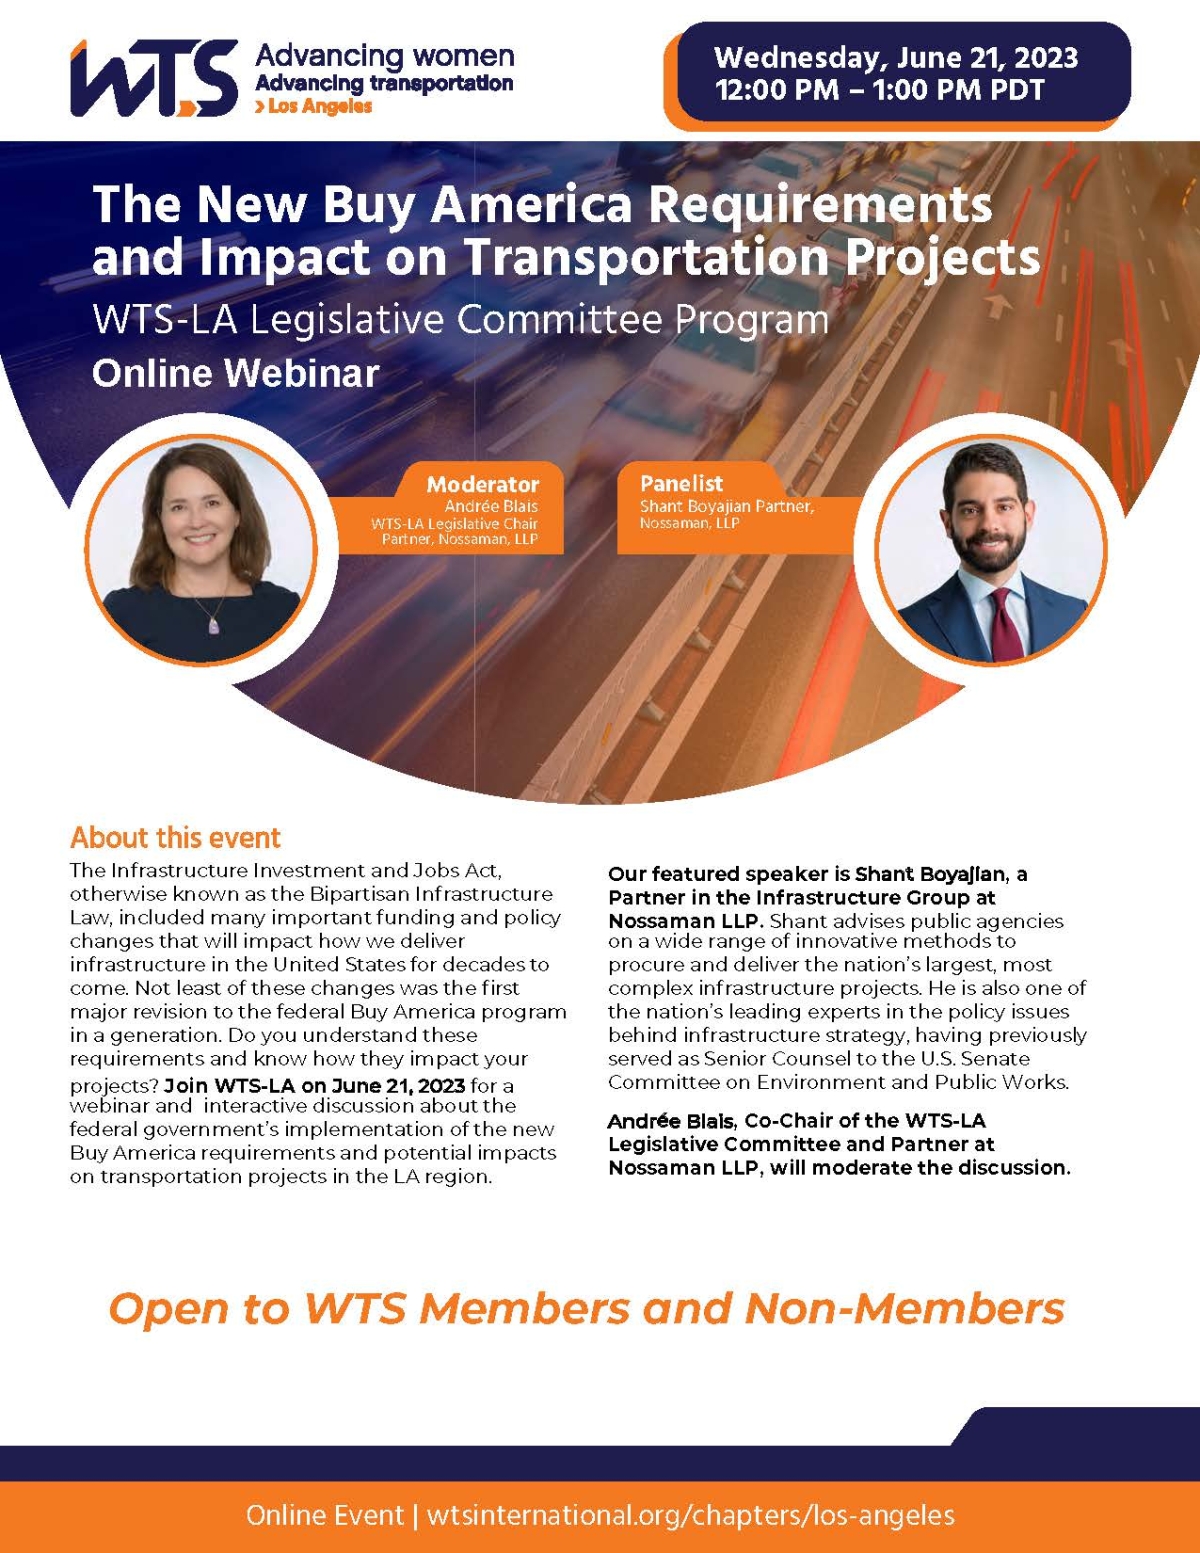 The New Buy America Requirements and Impact on Transportation Projects